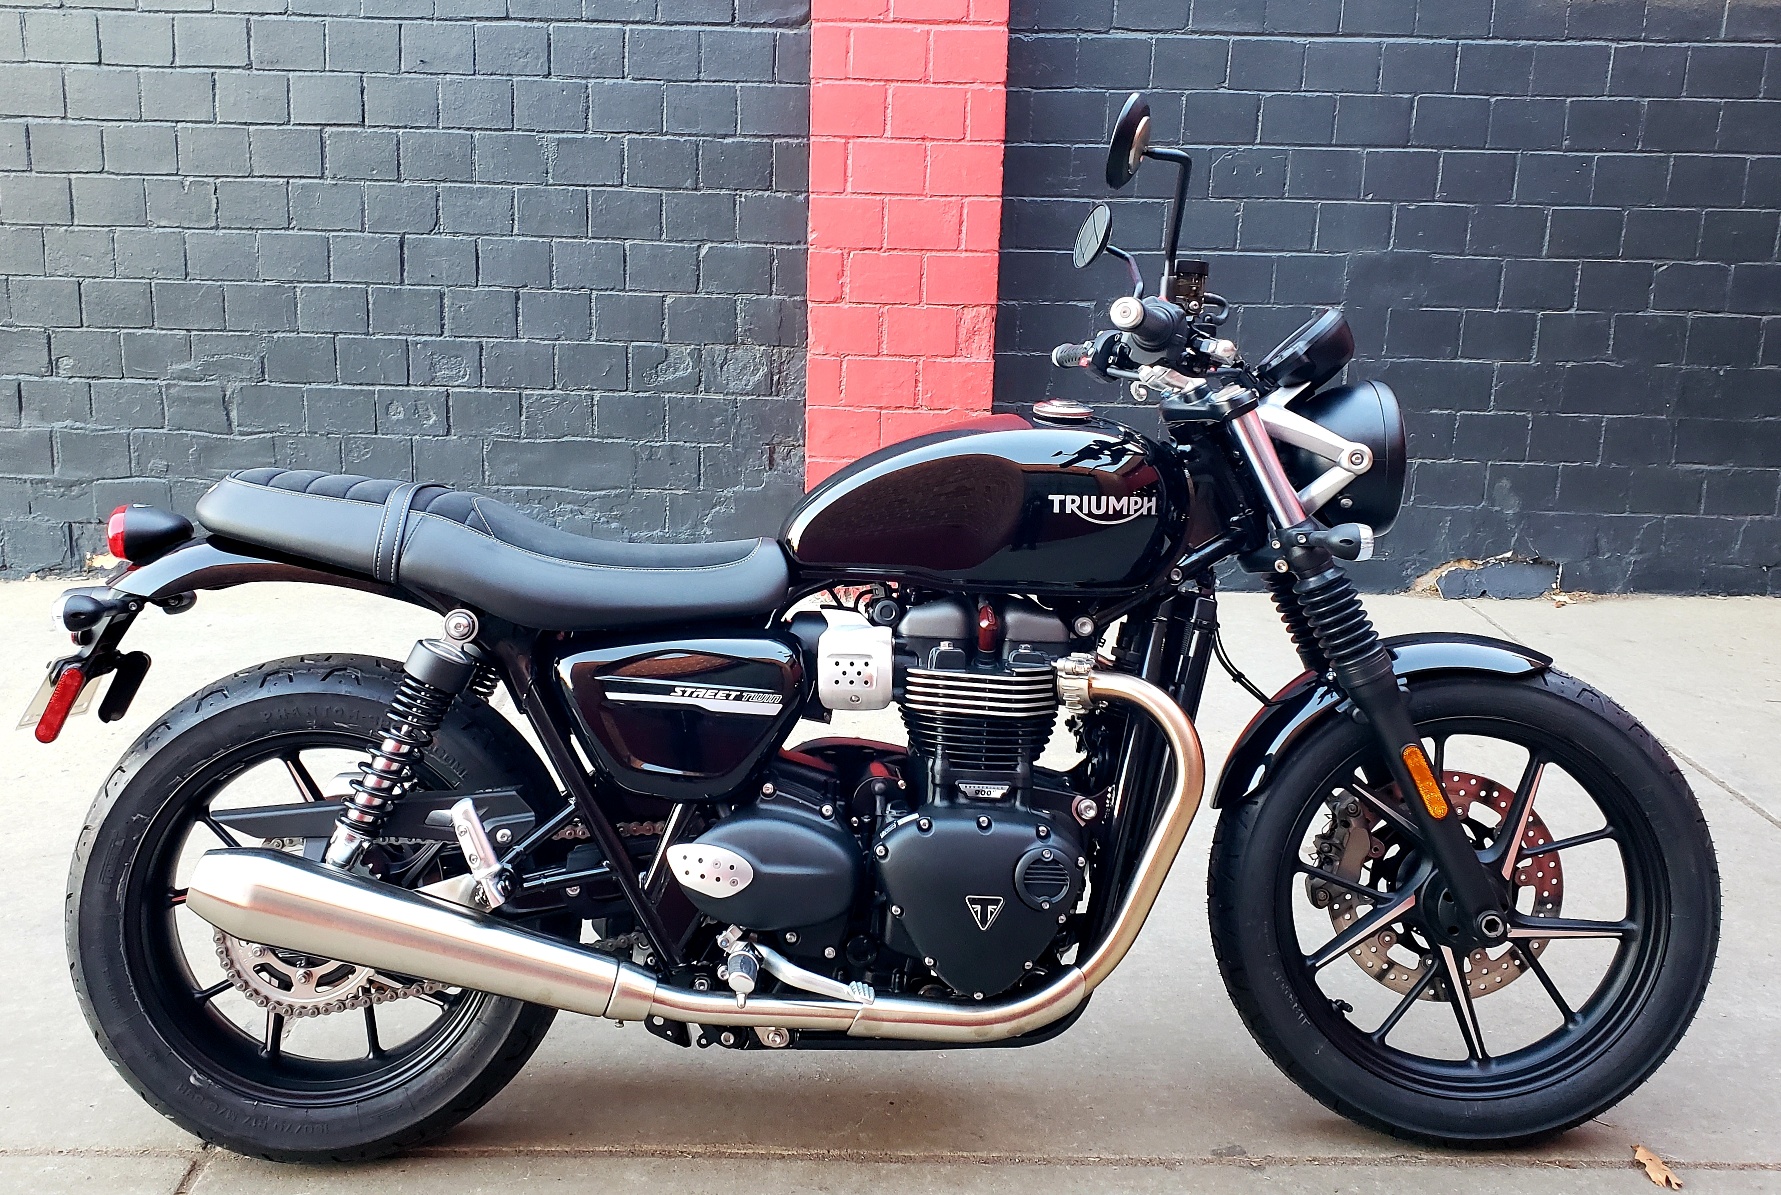 New 2019 TRIUMPH STREET TWIN Motorcycle in Denver #19T04 | Erico ...